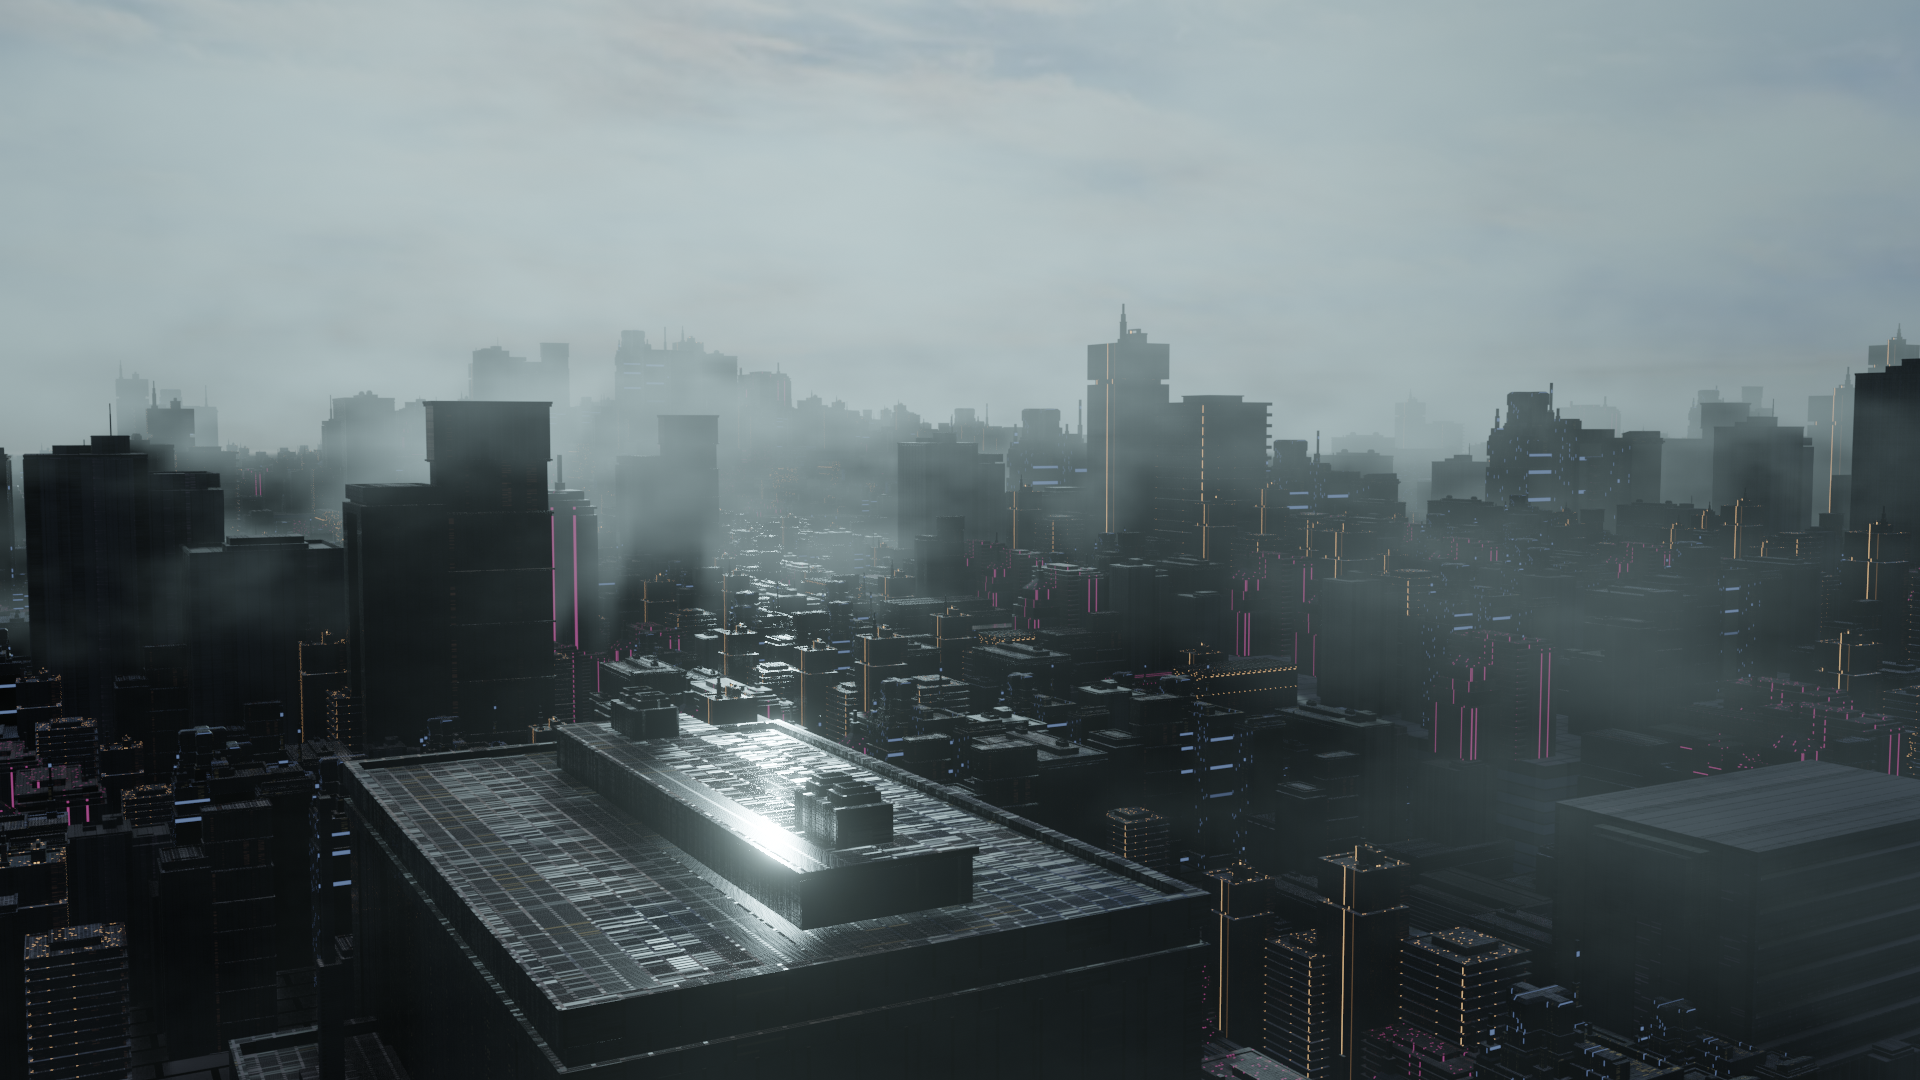 Blade runner style Cityscapes preview image 2